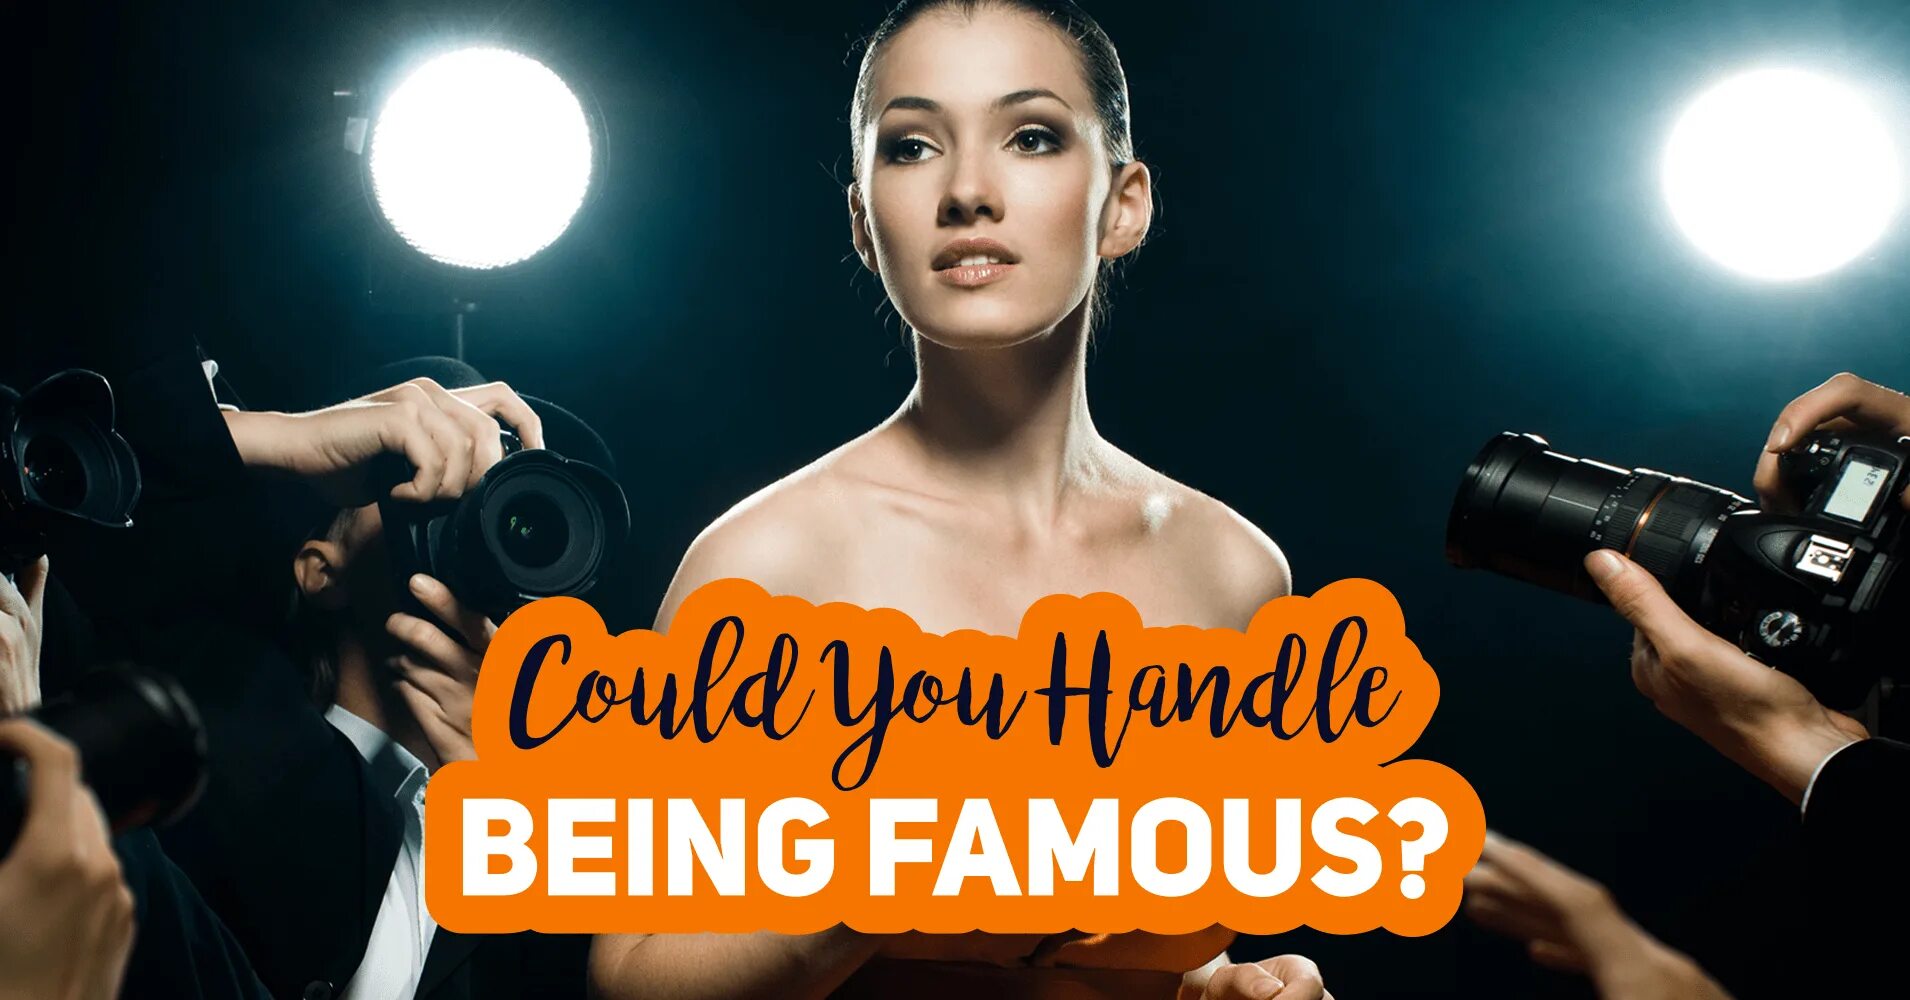 Famous mean. Being famous. Become famous. We could be famous. Fame and Celebrity questions.